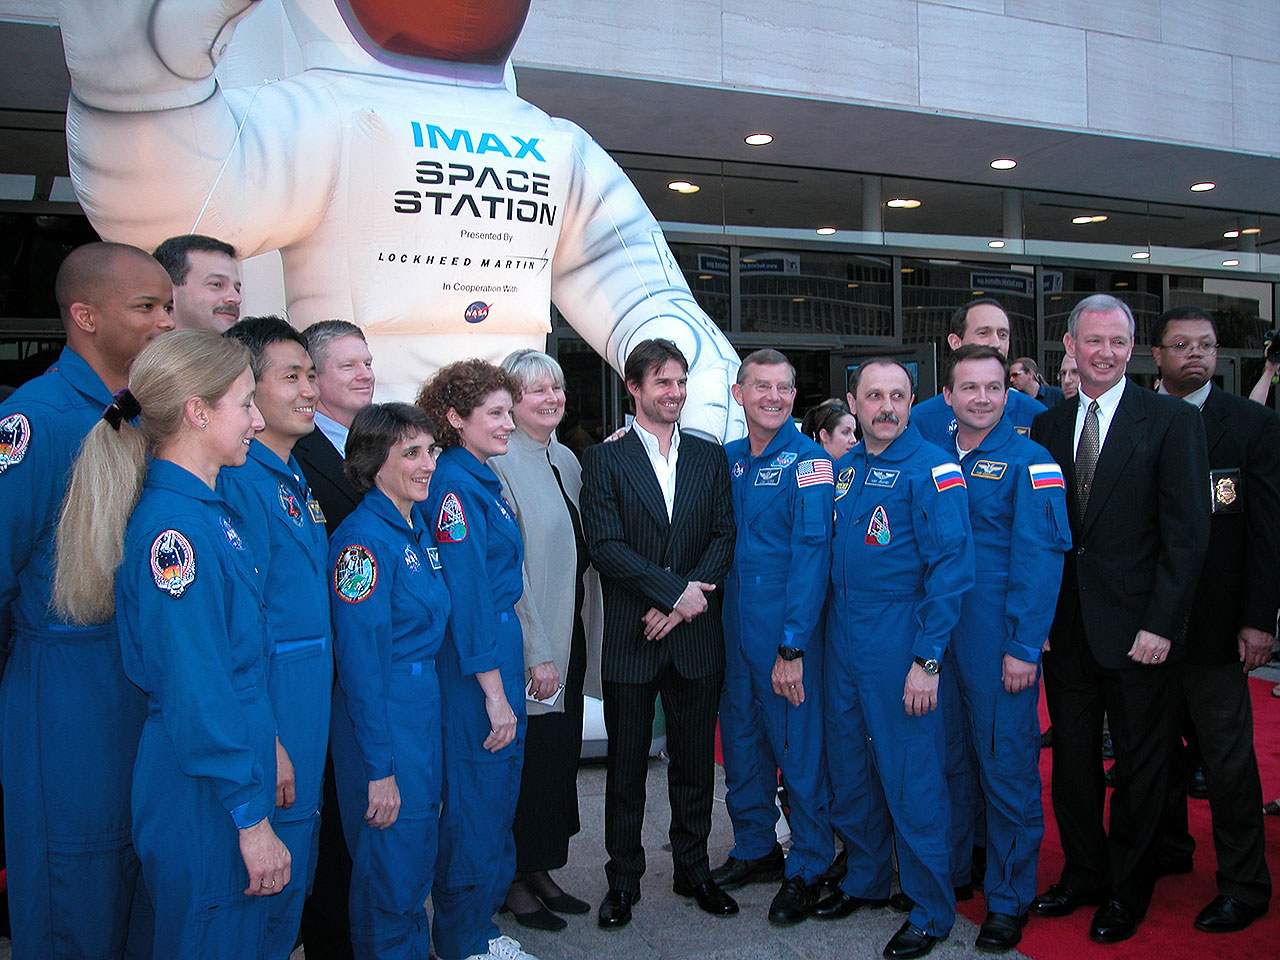 (image) Tom Cruise, at center, poses with NASA astronauts at the 2002 premiere of the IMAX film <em>Space Station 3D</em> at the National Air and Space Museum in Washington, DC. From left to right: Robert Curbeam, Marsha Ivins, Koichi Wakata, Scott Altman, Nancy Currie-Gregg, Bill Shepherd, Susan Helms, IMAX producer Toni Myers, James Voss, Yuri Usachov, Yuri Lonchakov, Jim Newman and Brian Duffy.